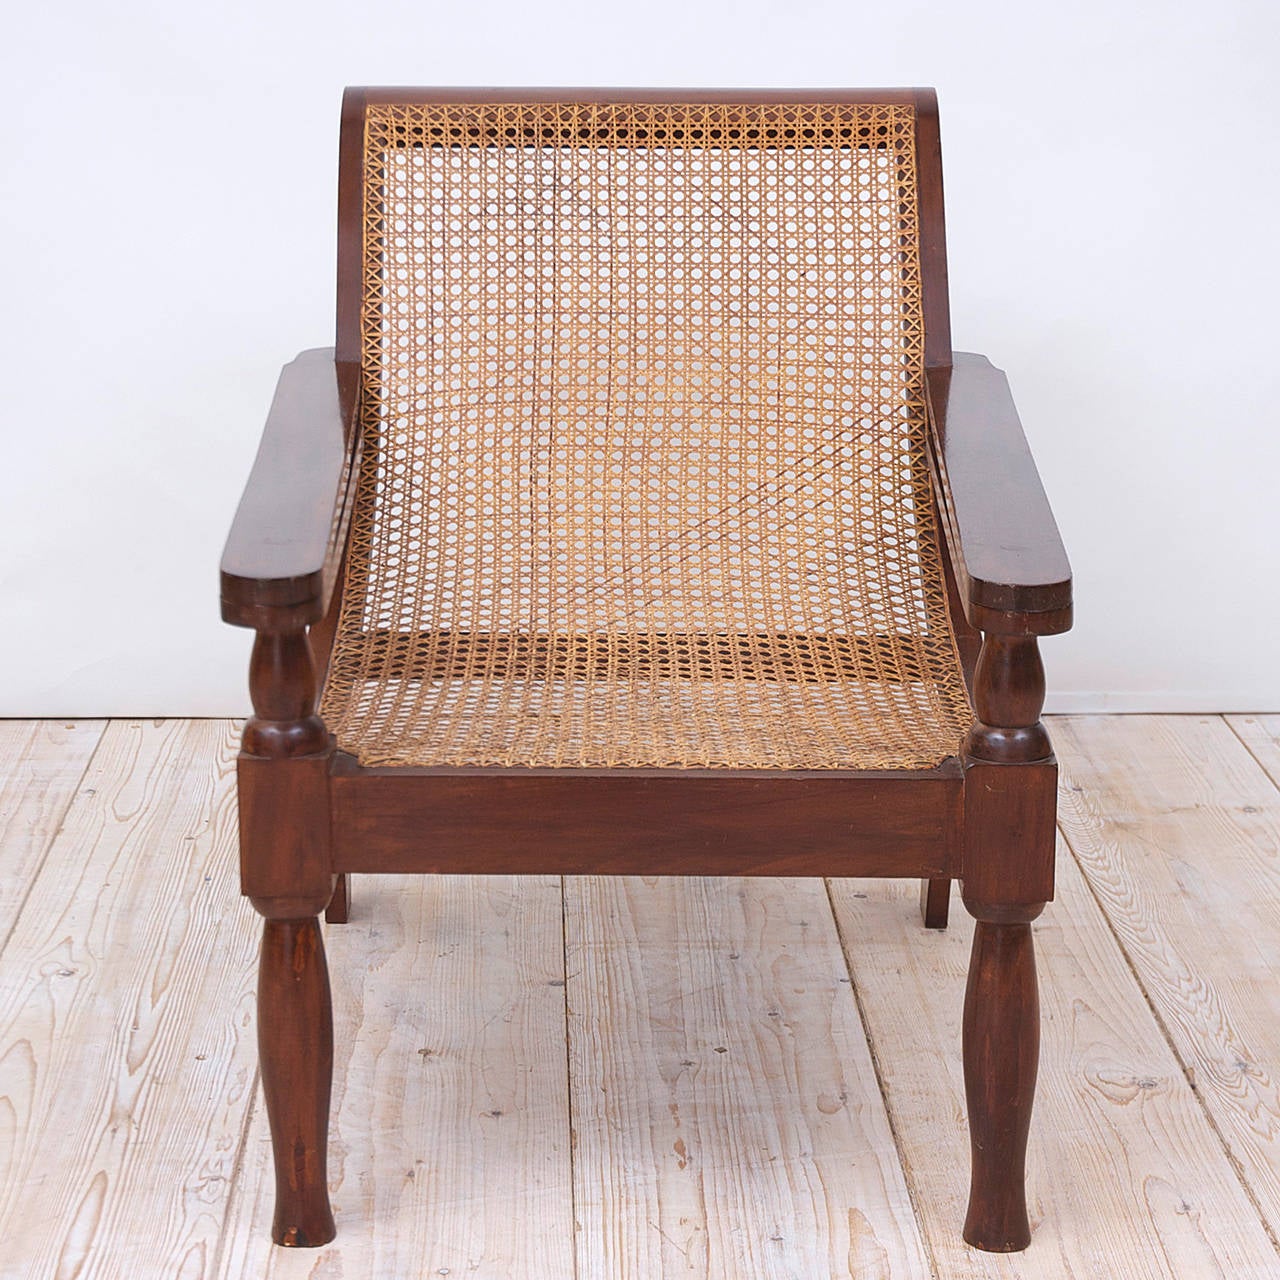 A 20th century West Indies Planter's chair in mahogany with caning.

Measures: 27 1/2